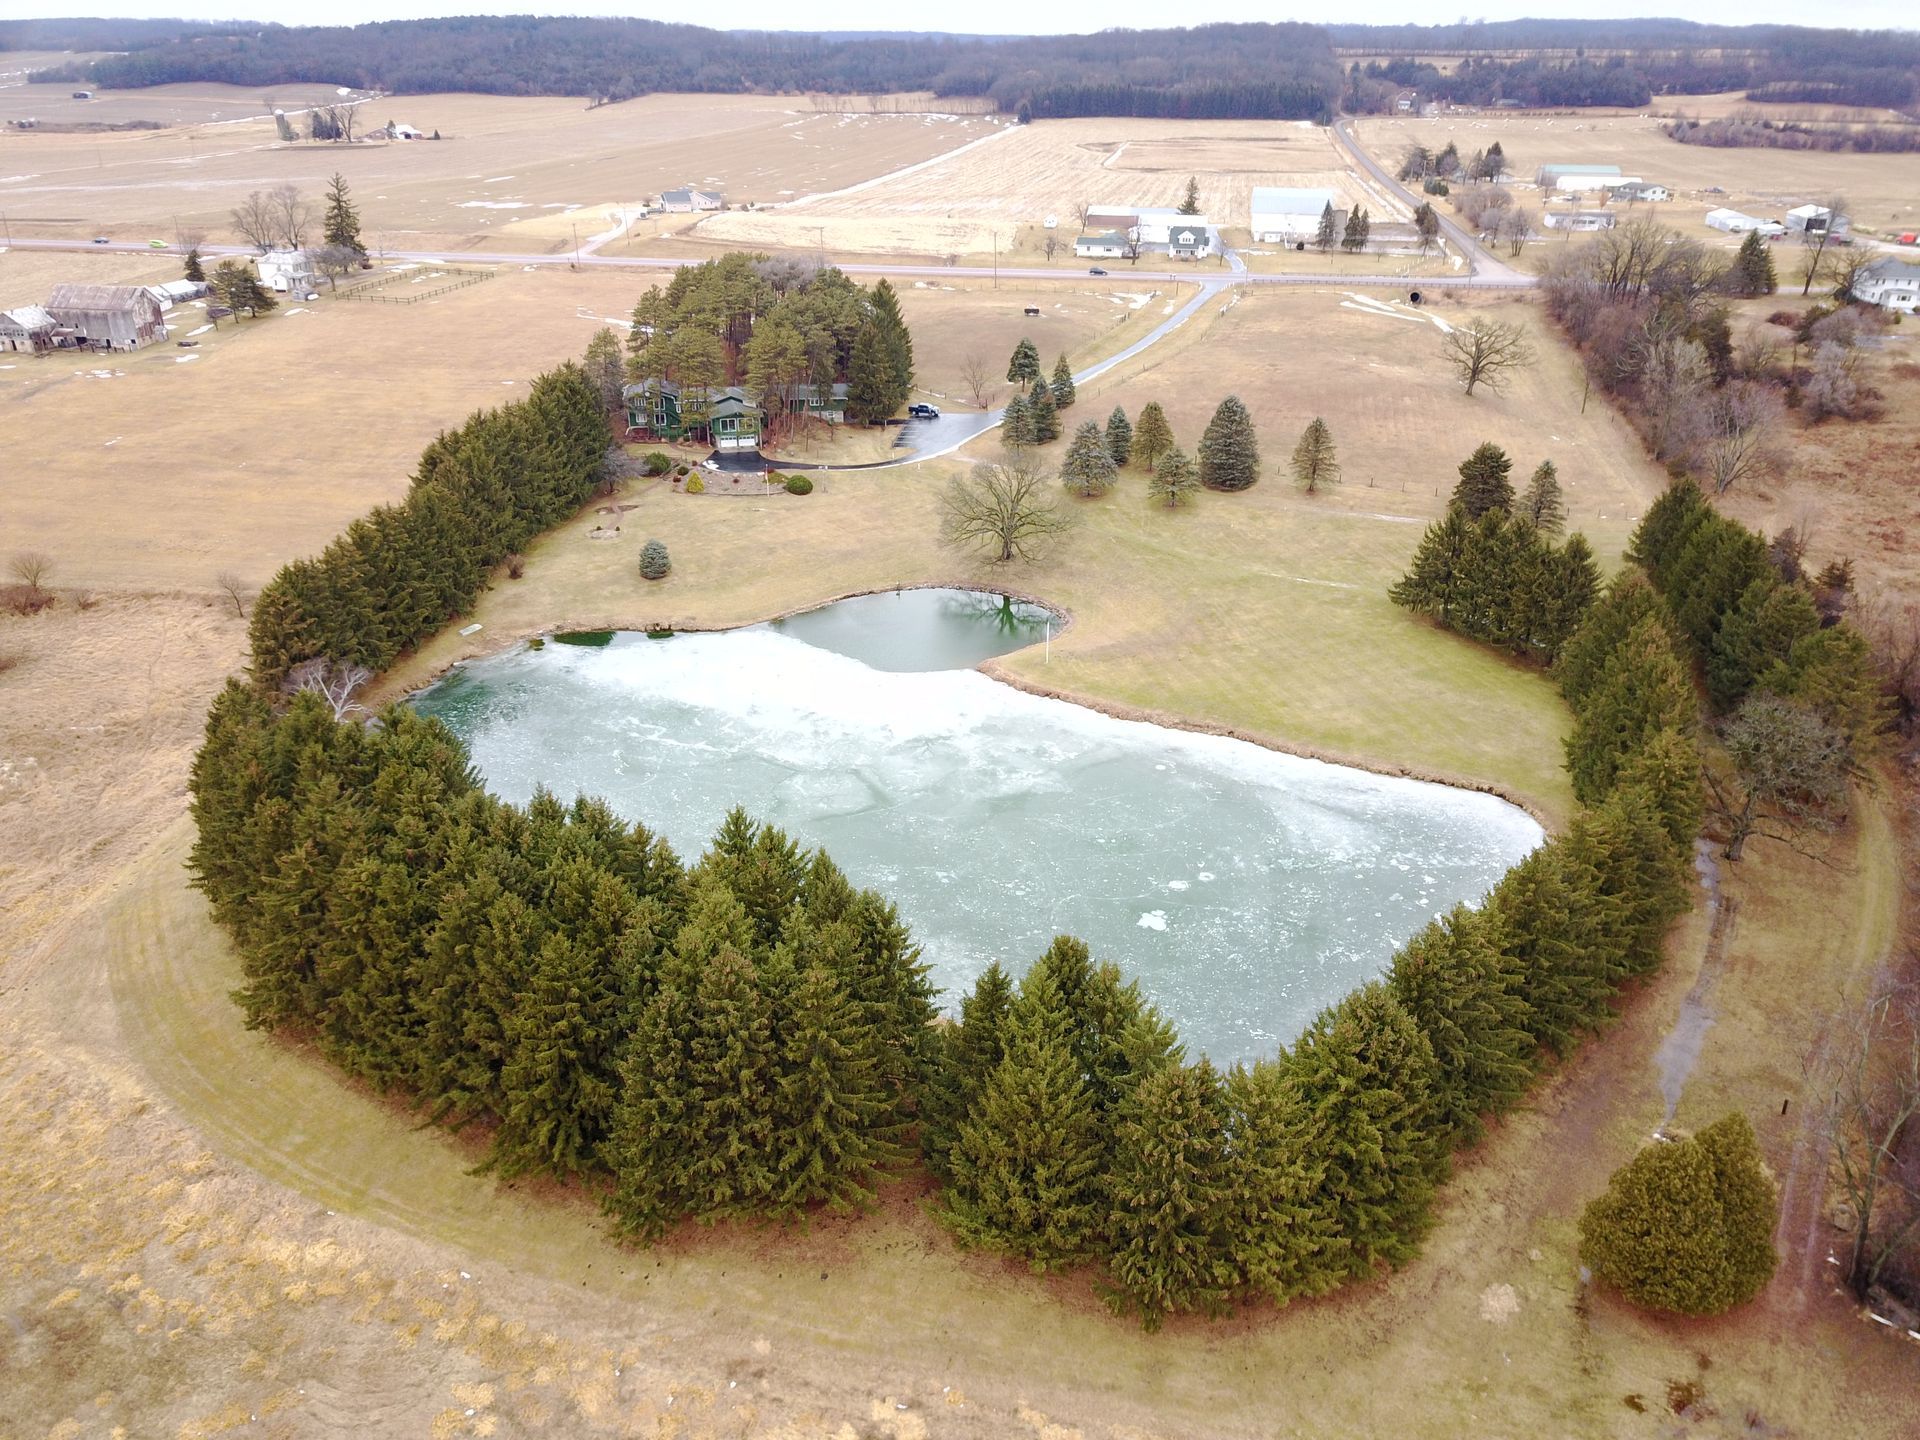 An aerial view of a pond surrounded by pine trees